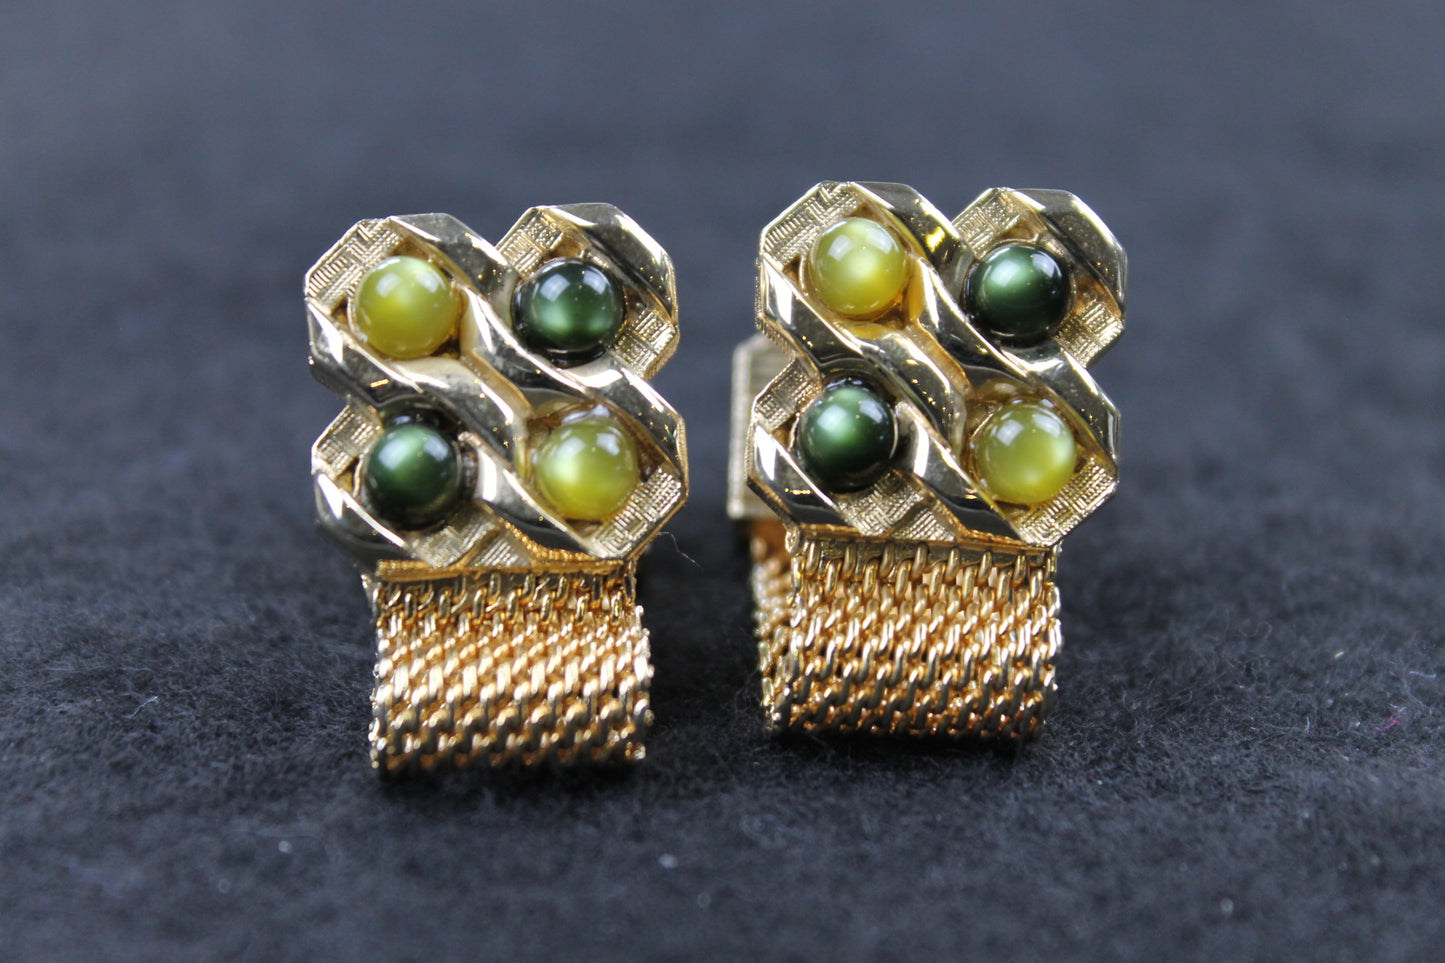 Vintage Coloured Faux Pearl Wrap Around Cufflinks